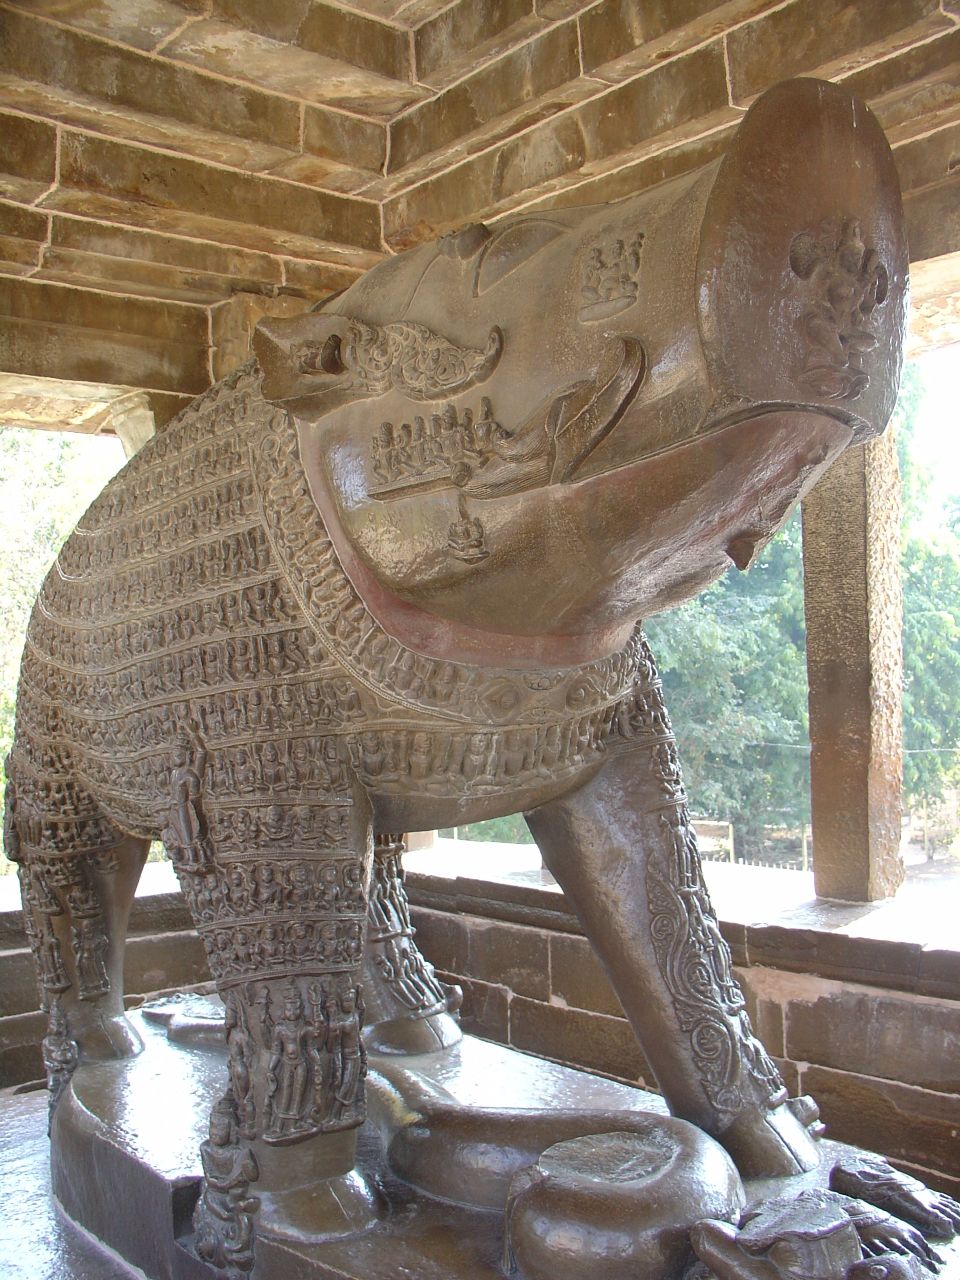 this is an elephant statue in the ruins of a temple